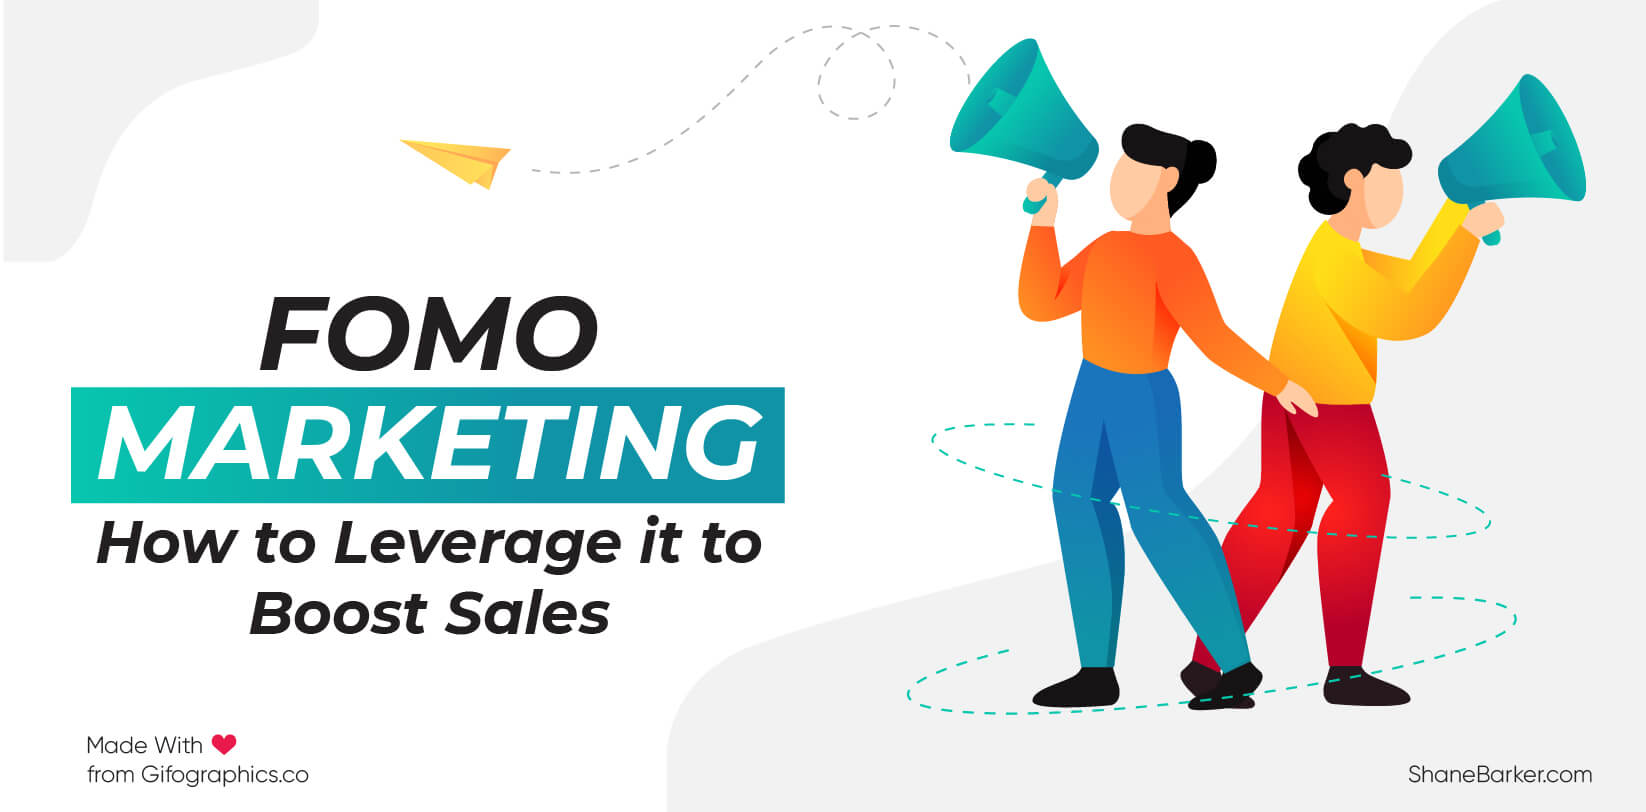 fomo marketing: how to leverage it to boost sales